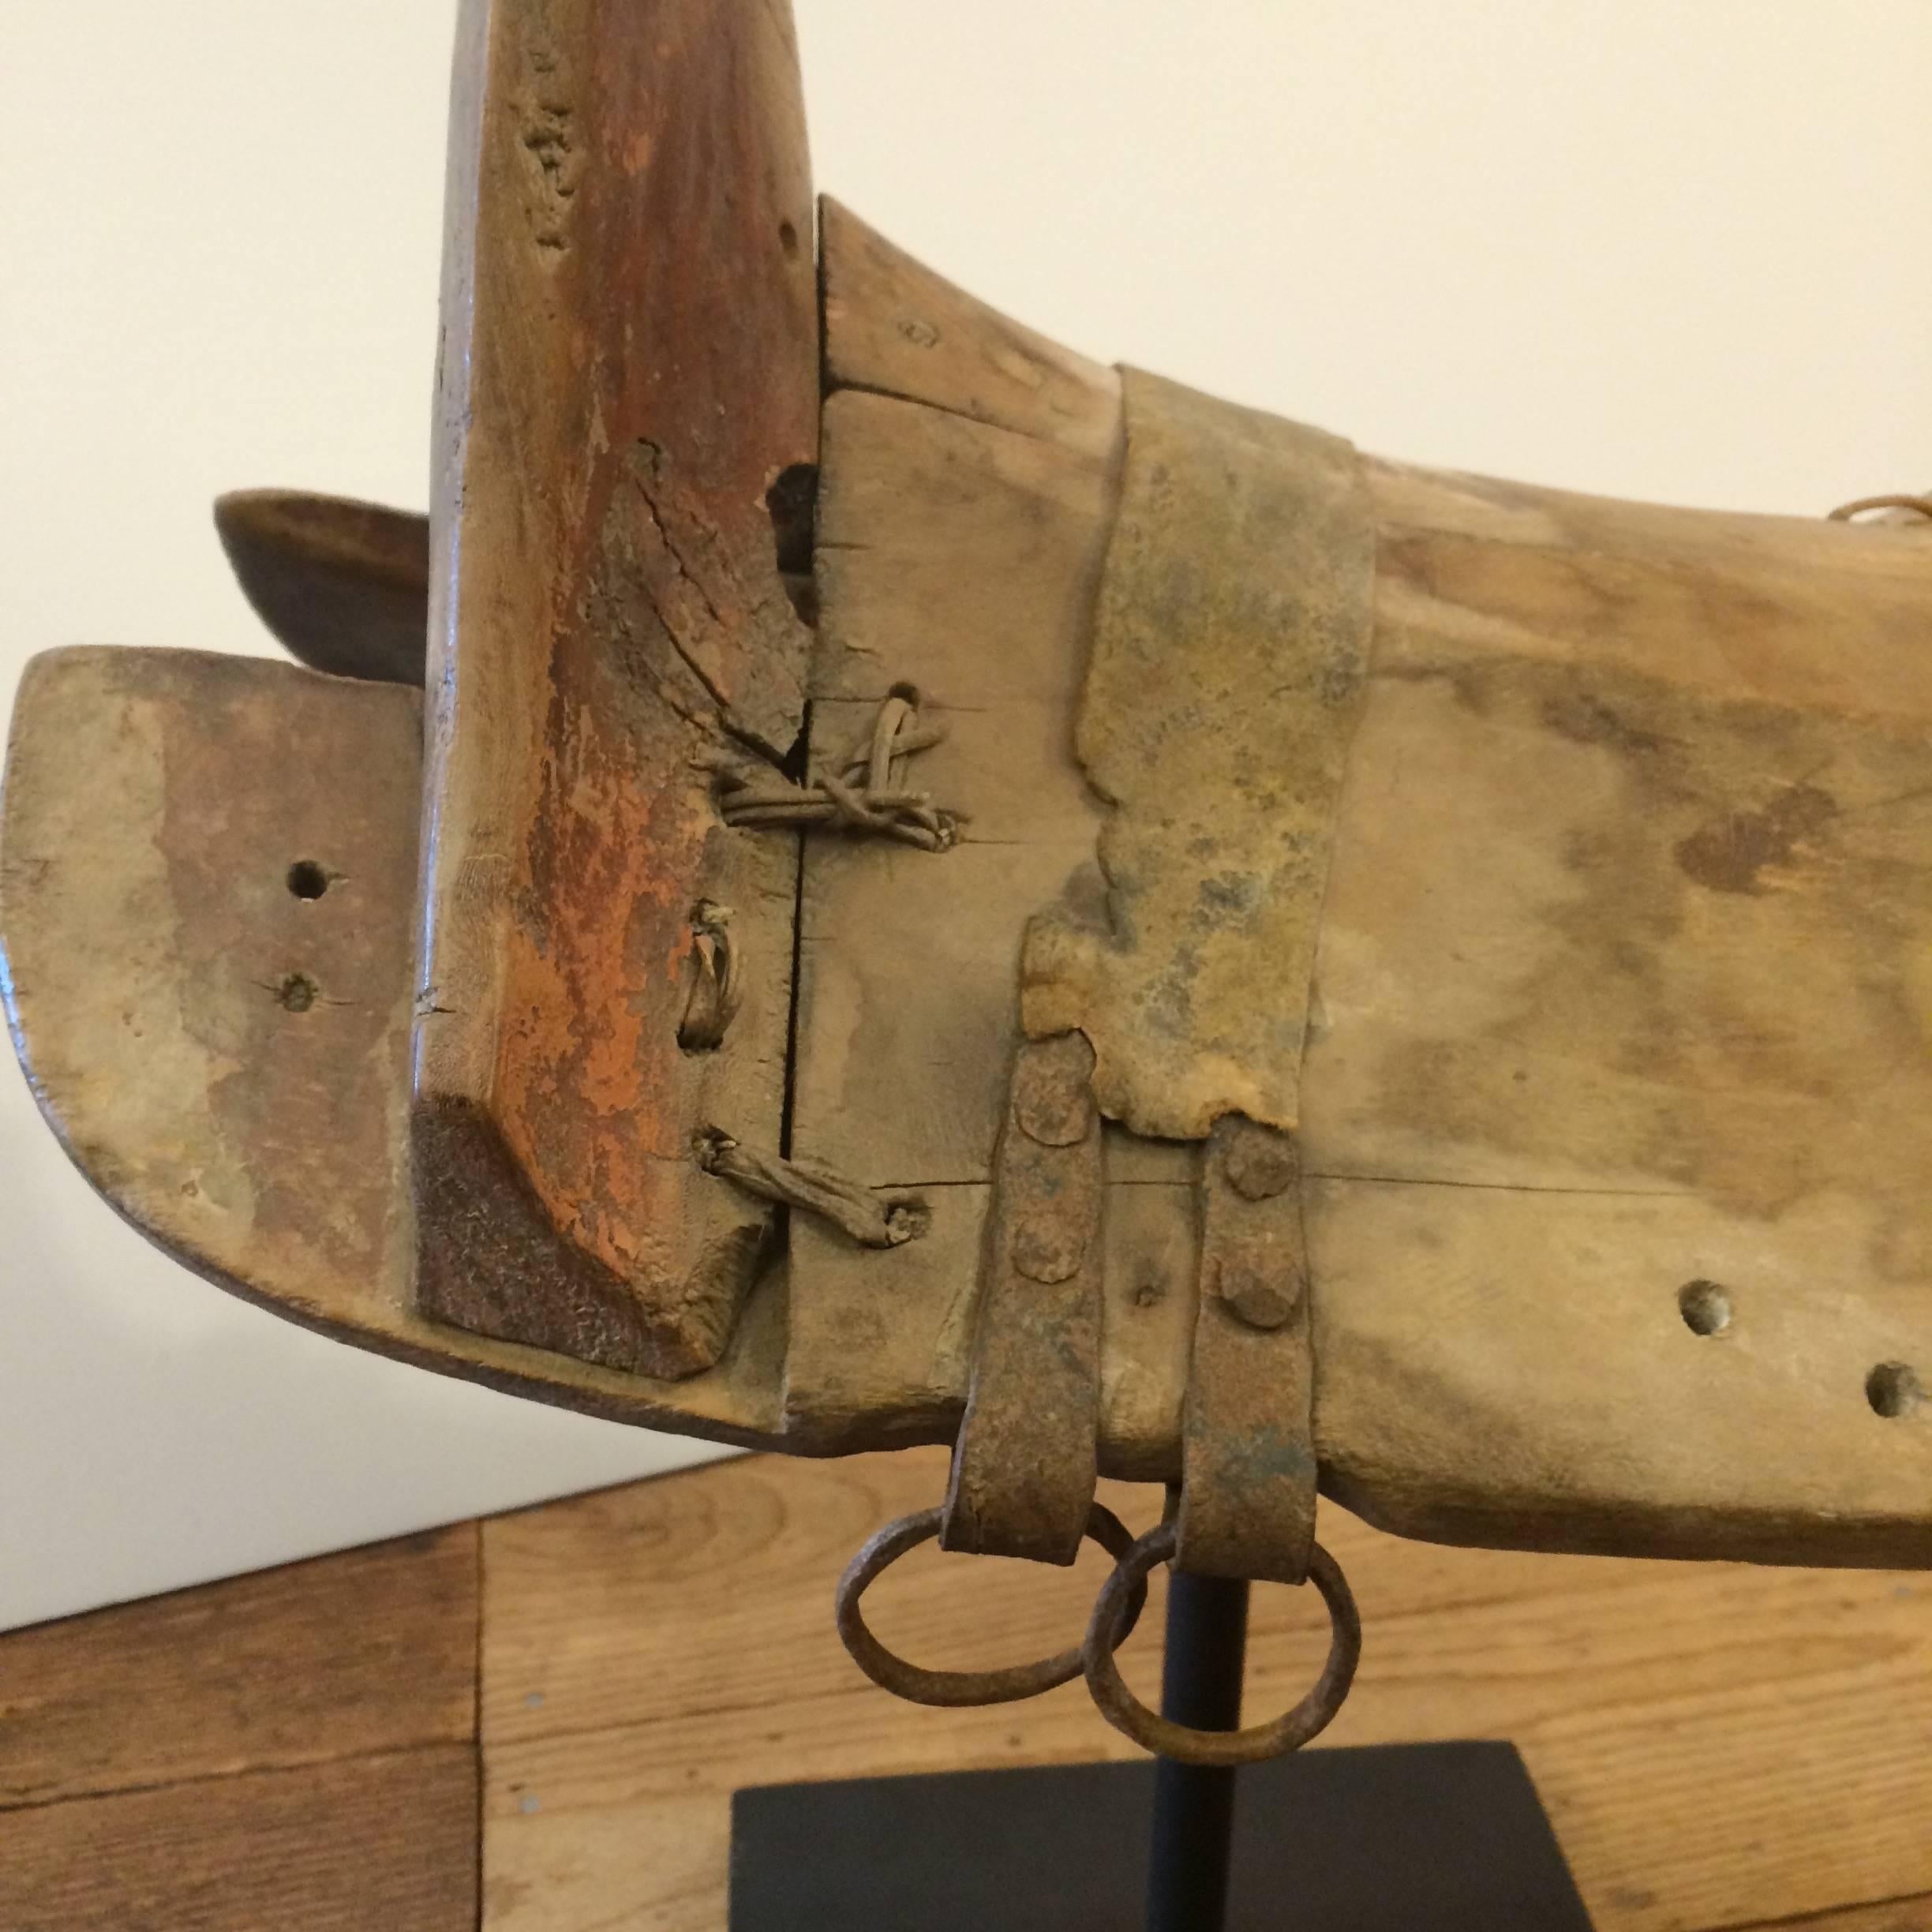 Wonderful found object sculpture oozing with character that's an old wooden Chinese pony saddle with distressed surface, leather straps and rawhide adornments, mounted on a contemporary black metal stand. We don't know for sure how old it is, but it